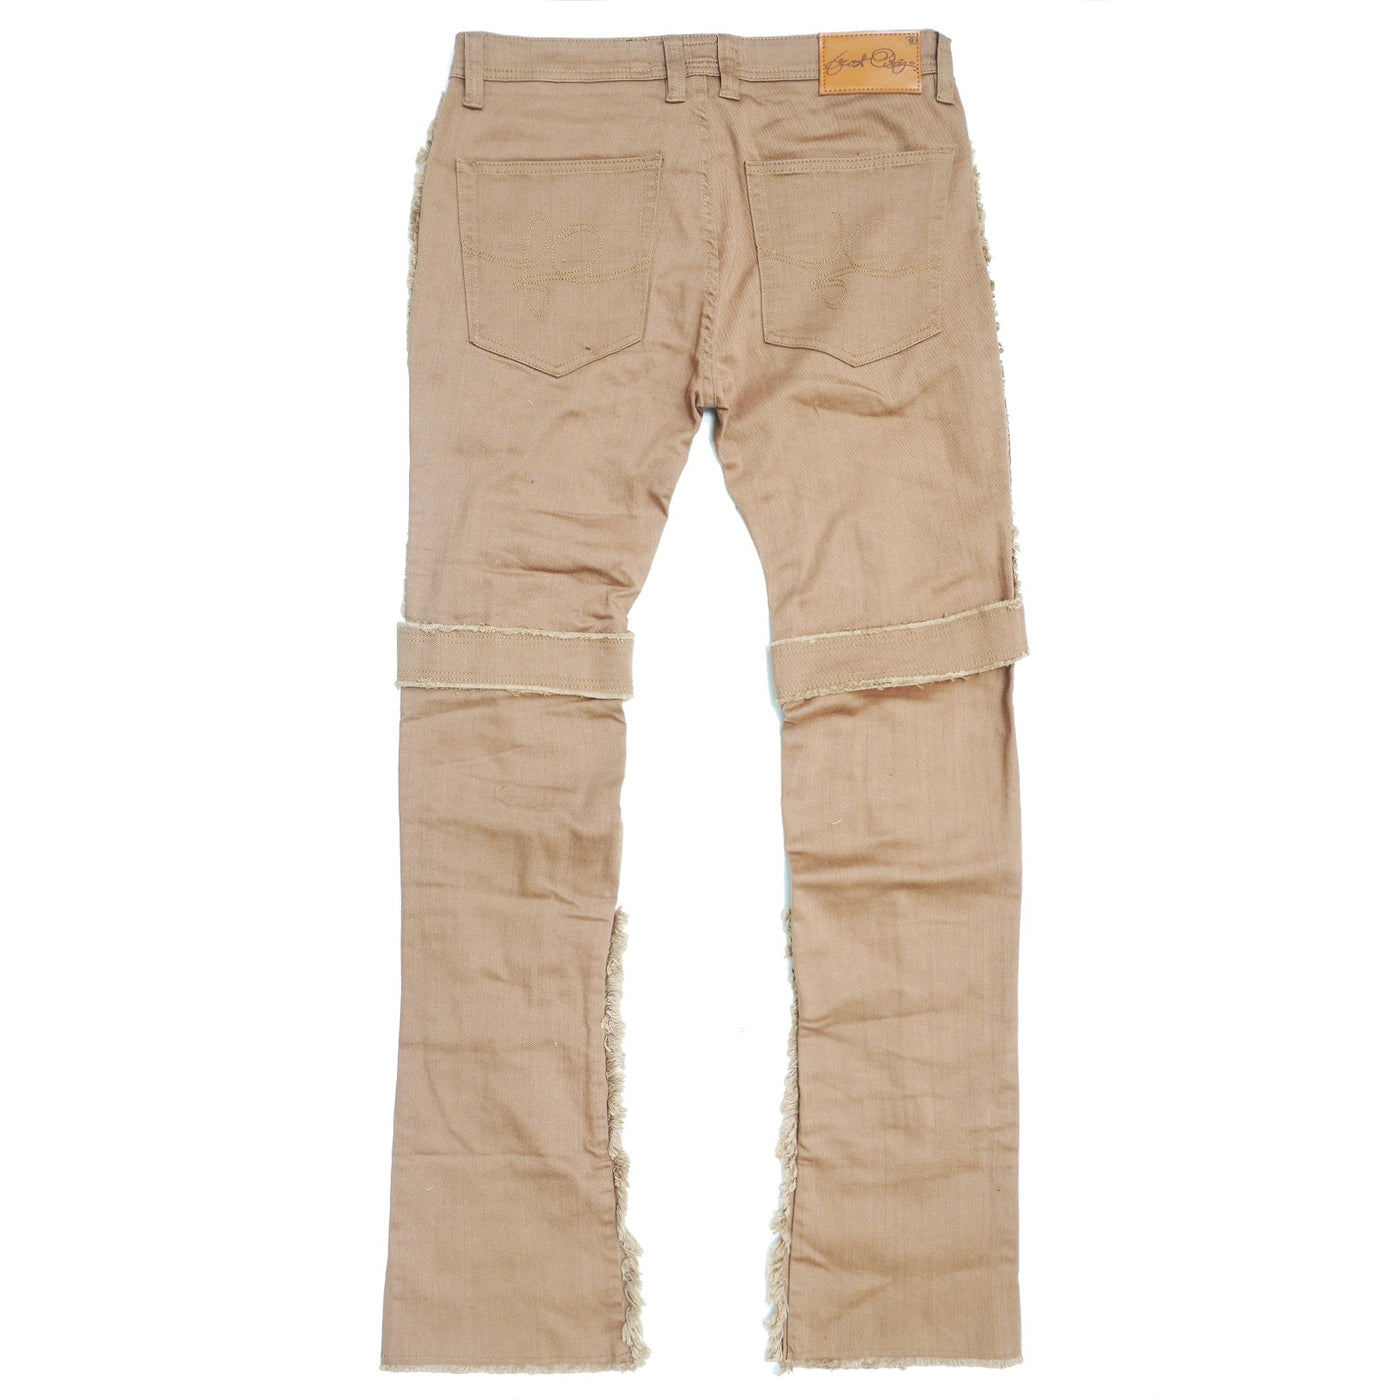 F1741 Frost Stack Jeans with Straps - Khaki